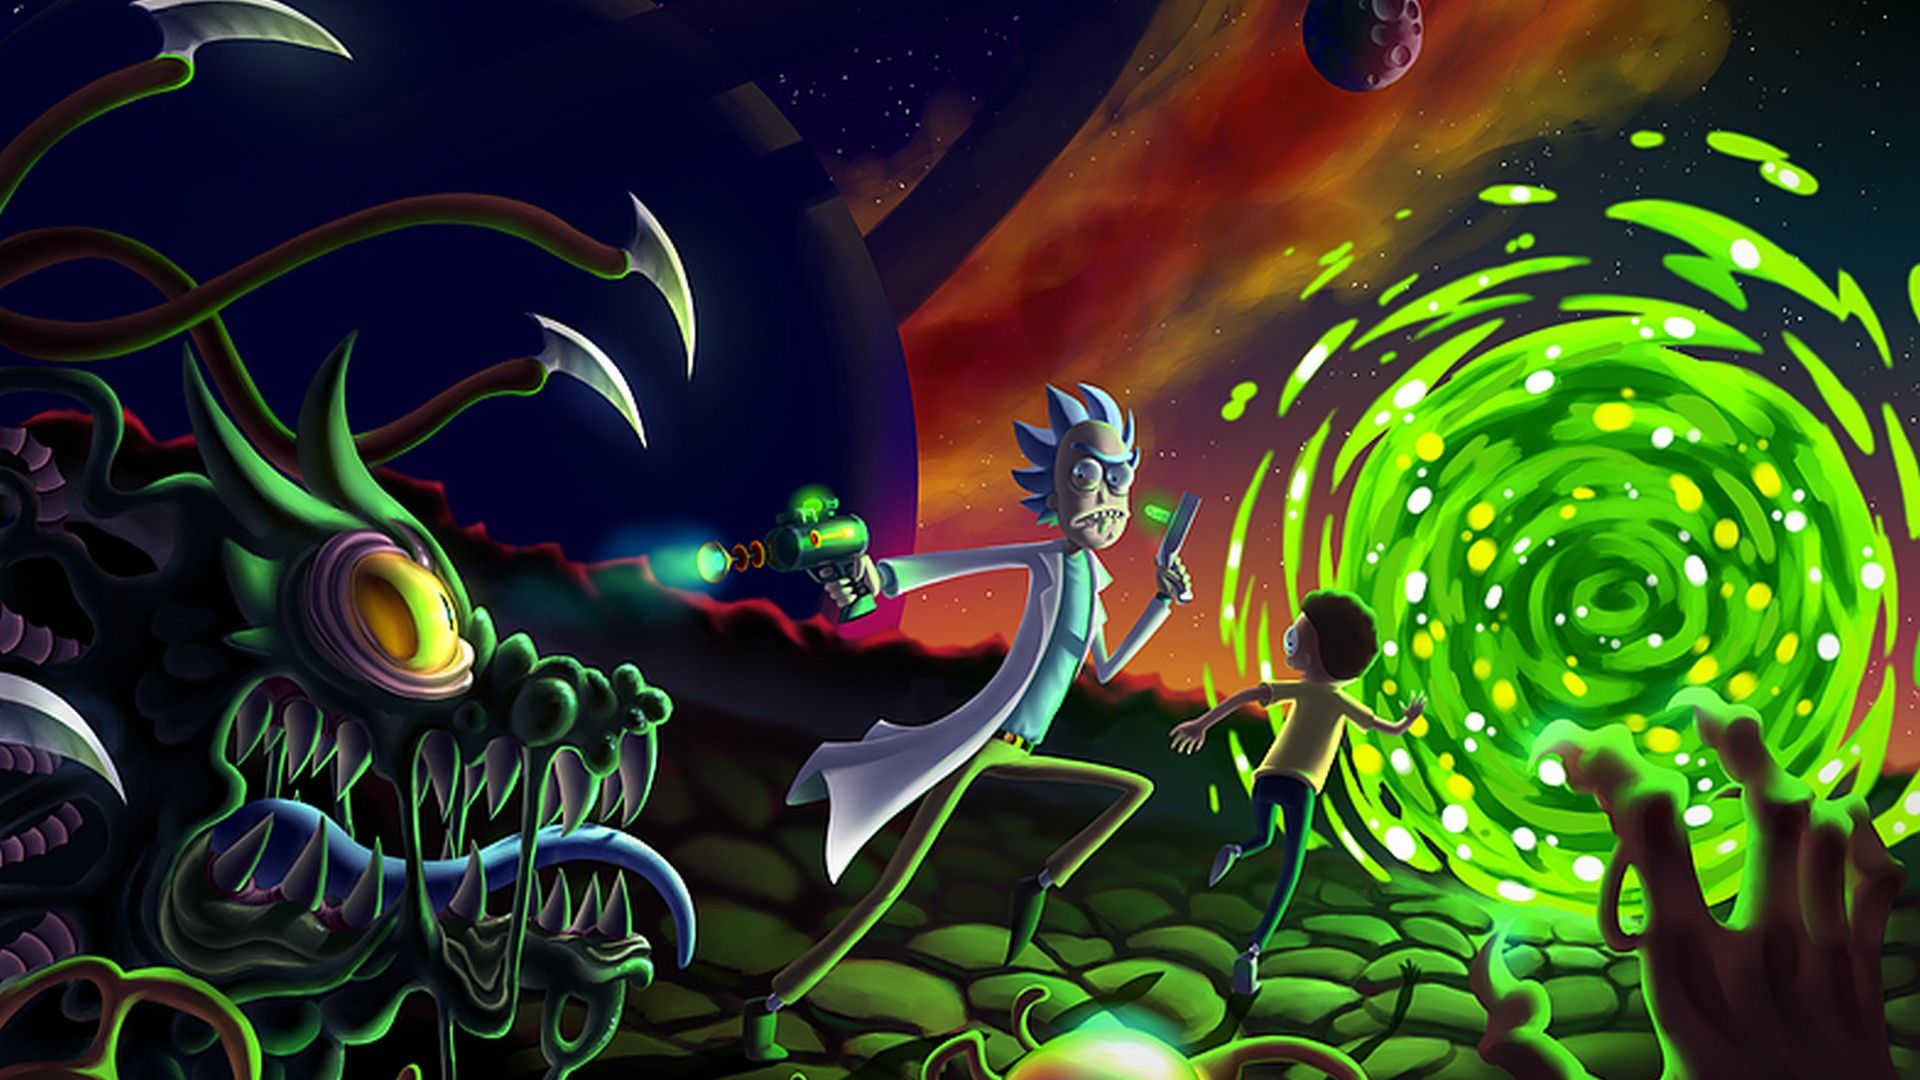 rick and morty background rick and morty wallpapers top rick and #33912